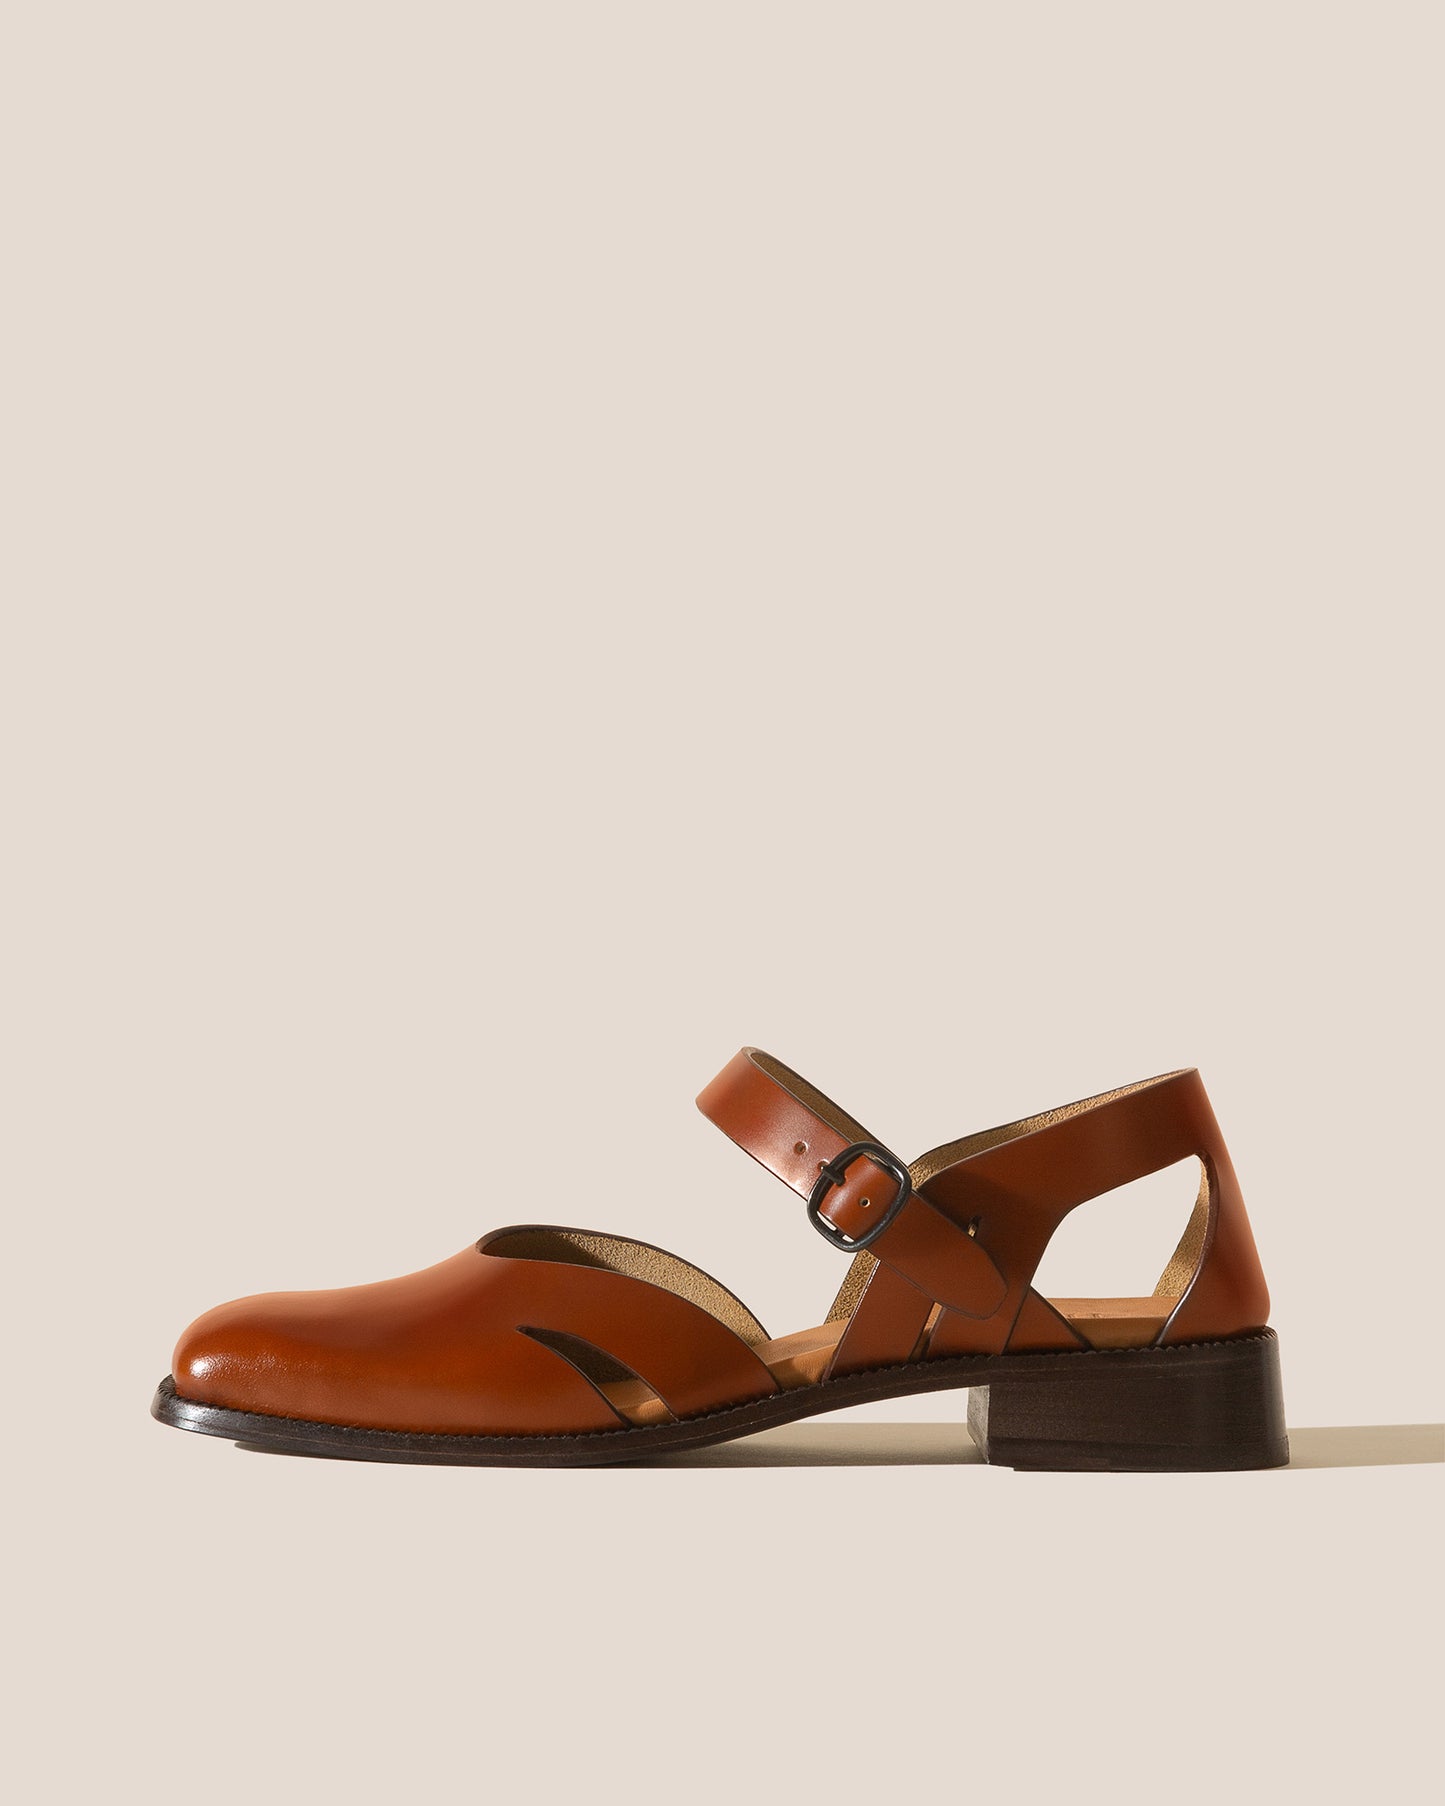 ALORDA - Two Part Shoe